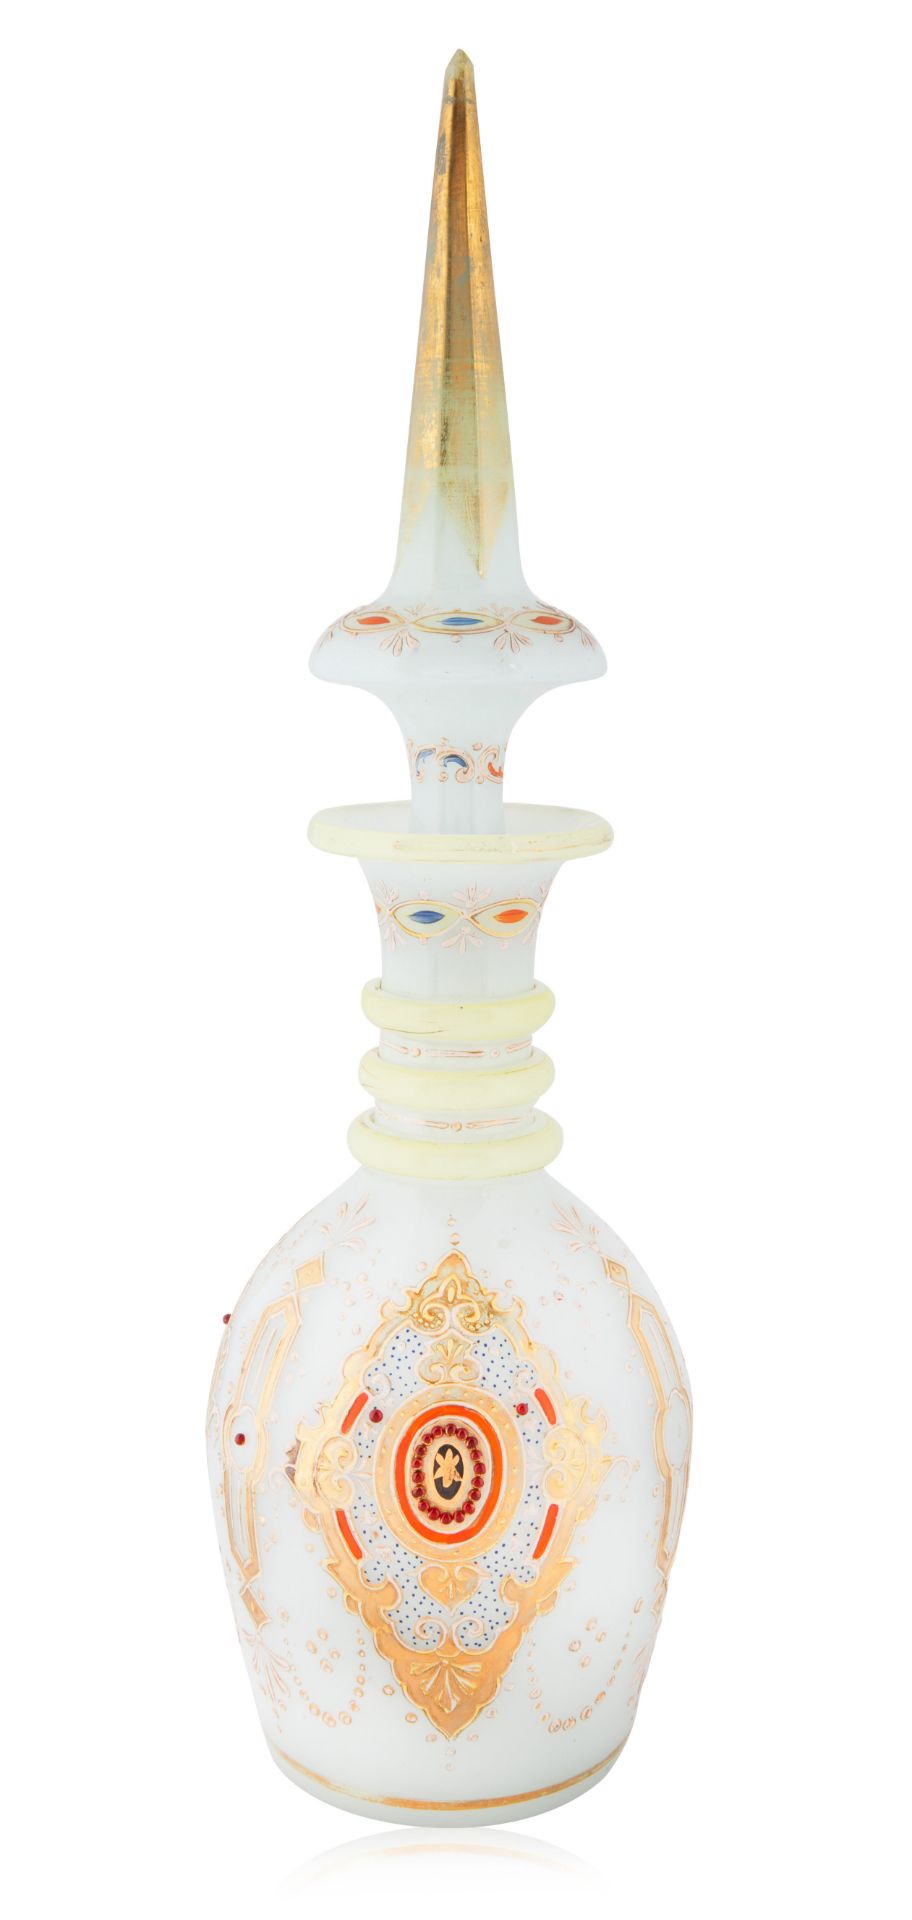 PAIR OF FRENCH OR BOHEMIAN OPALINE DECANTERS, LAST QUARTER OF THE 19TH CENTURY - Image 3 of 3